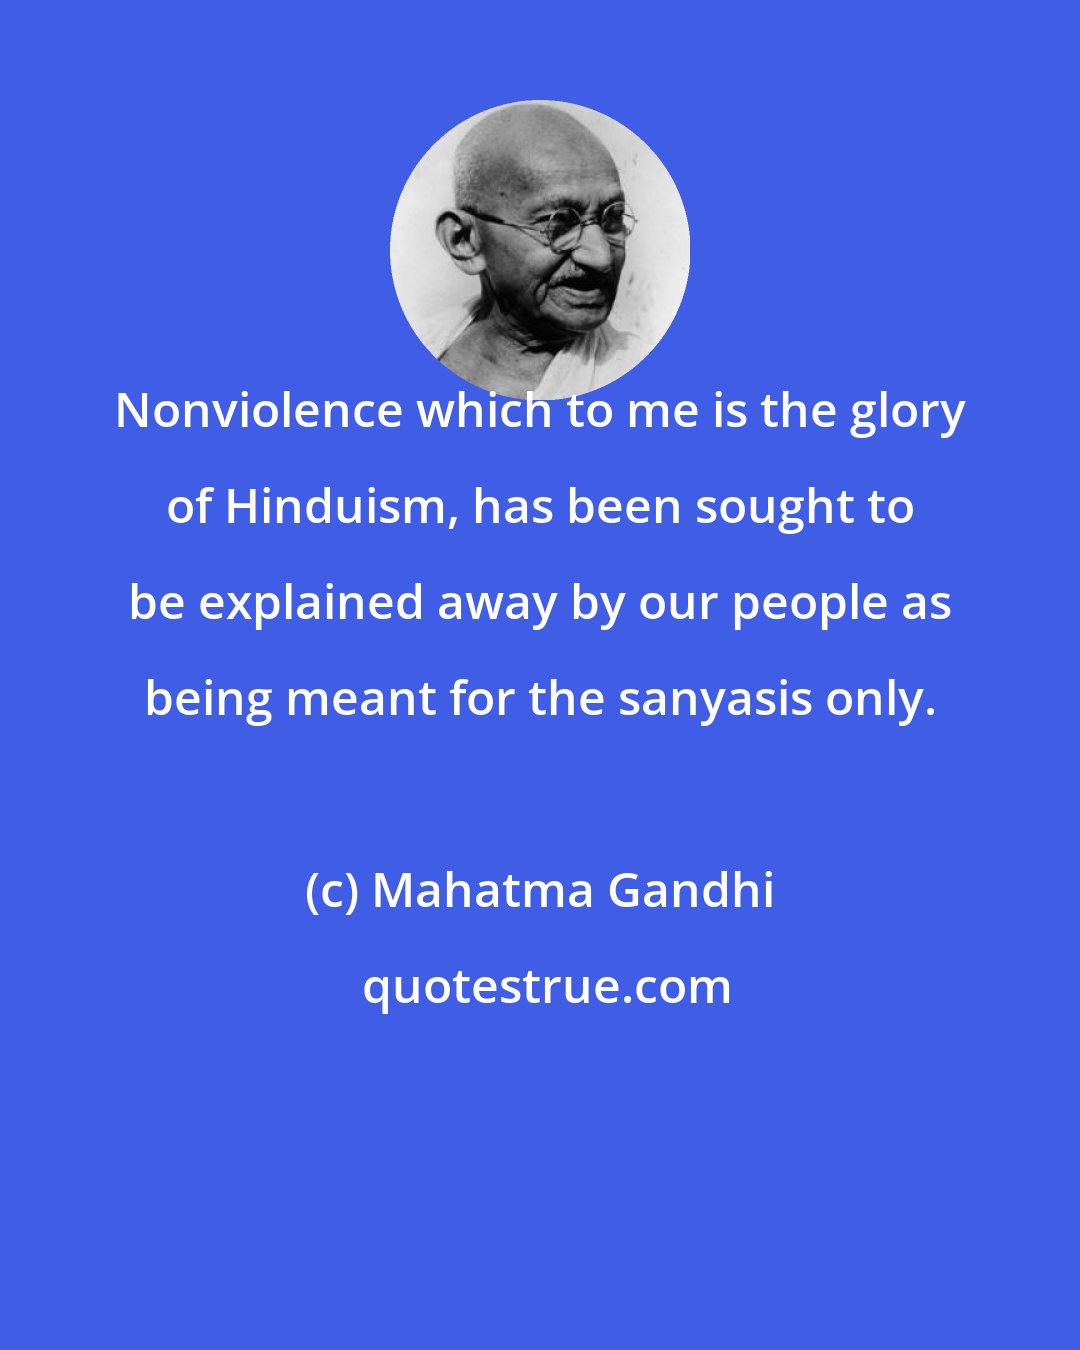 Mahatma Gandhi: Nonviolence which to me is the glory of Hinduism, has been sought to be explained away by our people as being meant for the sanyasis only.